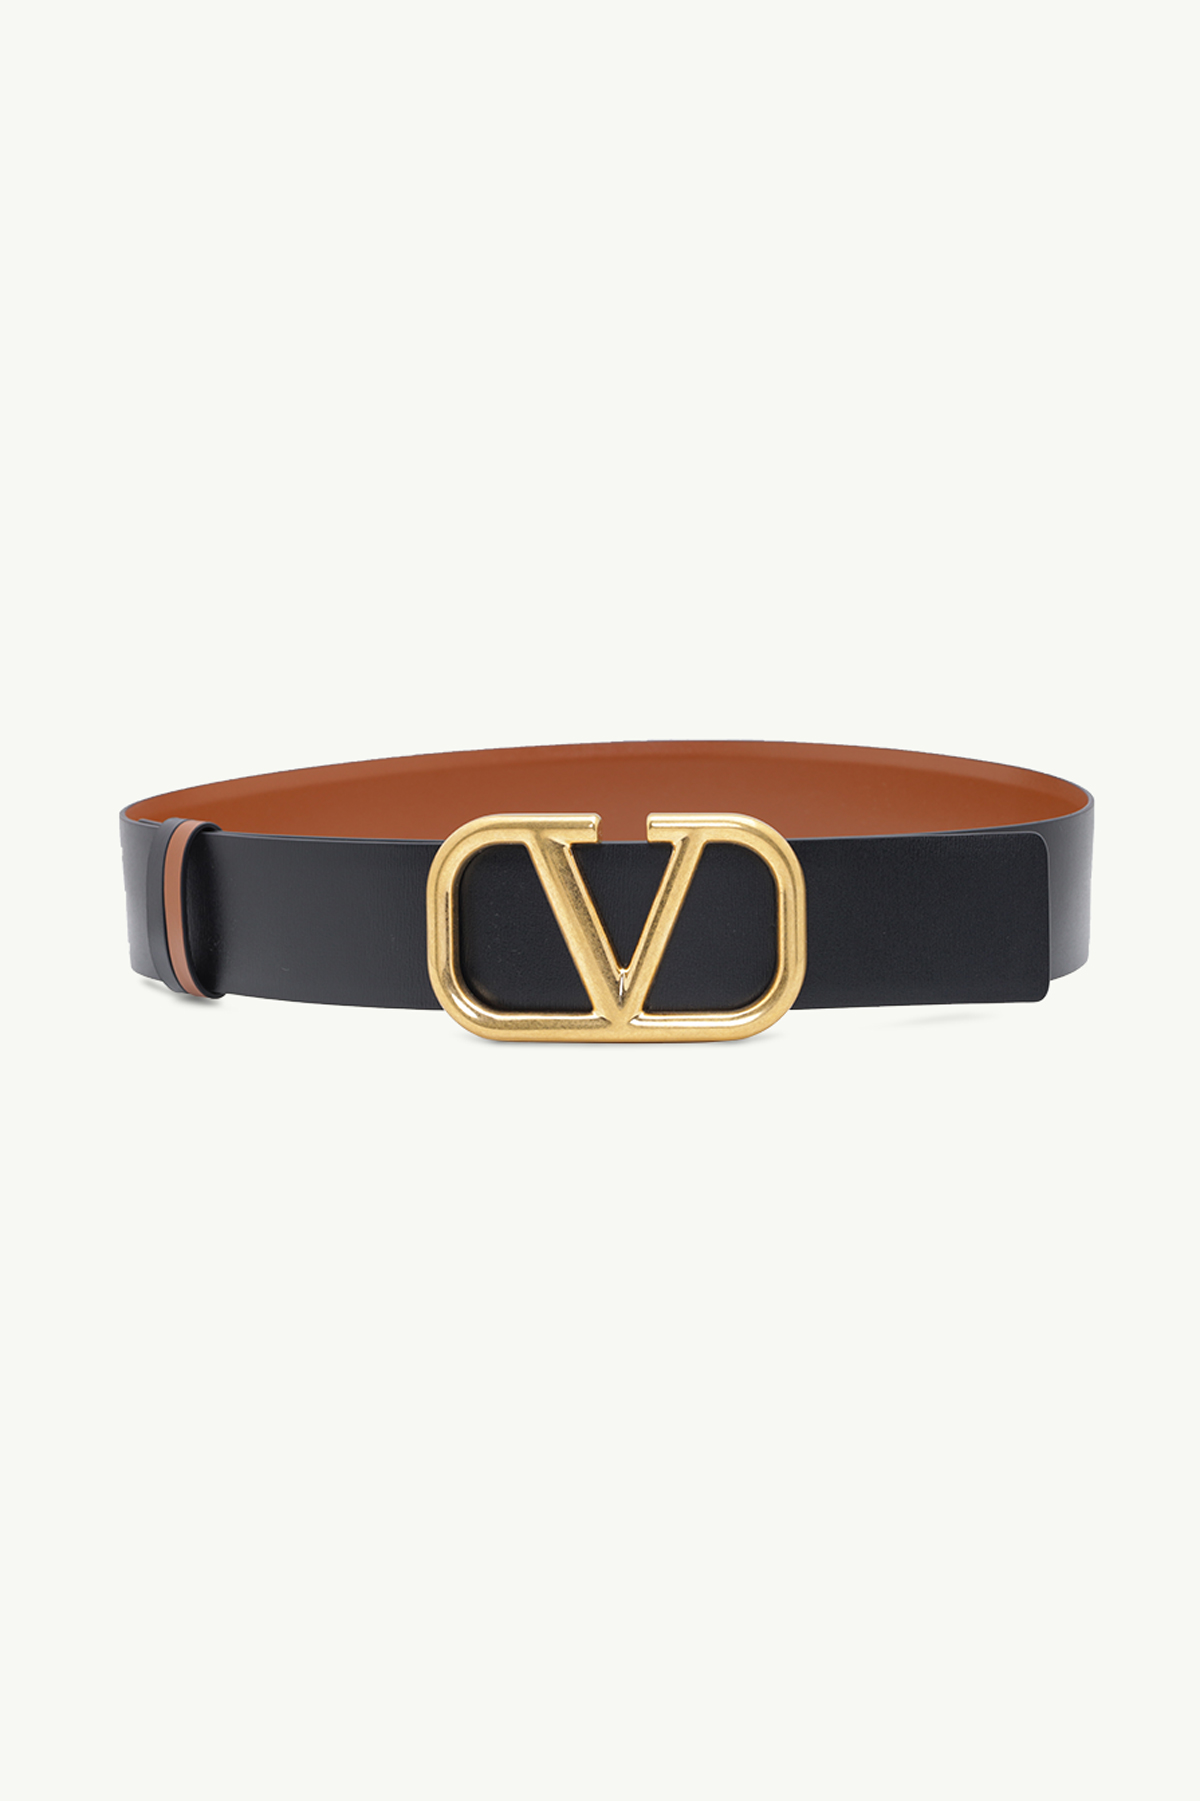 VALENTINO Reversible Belt 4cm in Black/Brown Leather with VLogo Buckle 2